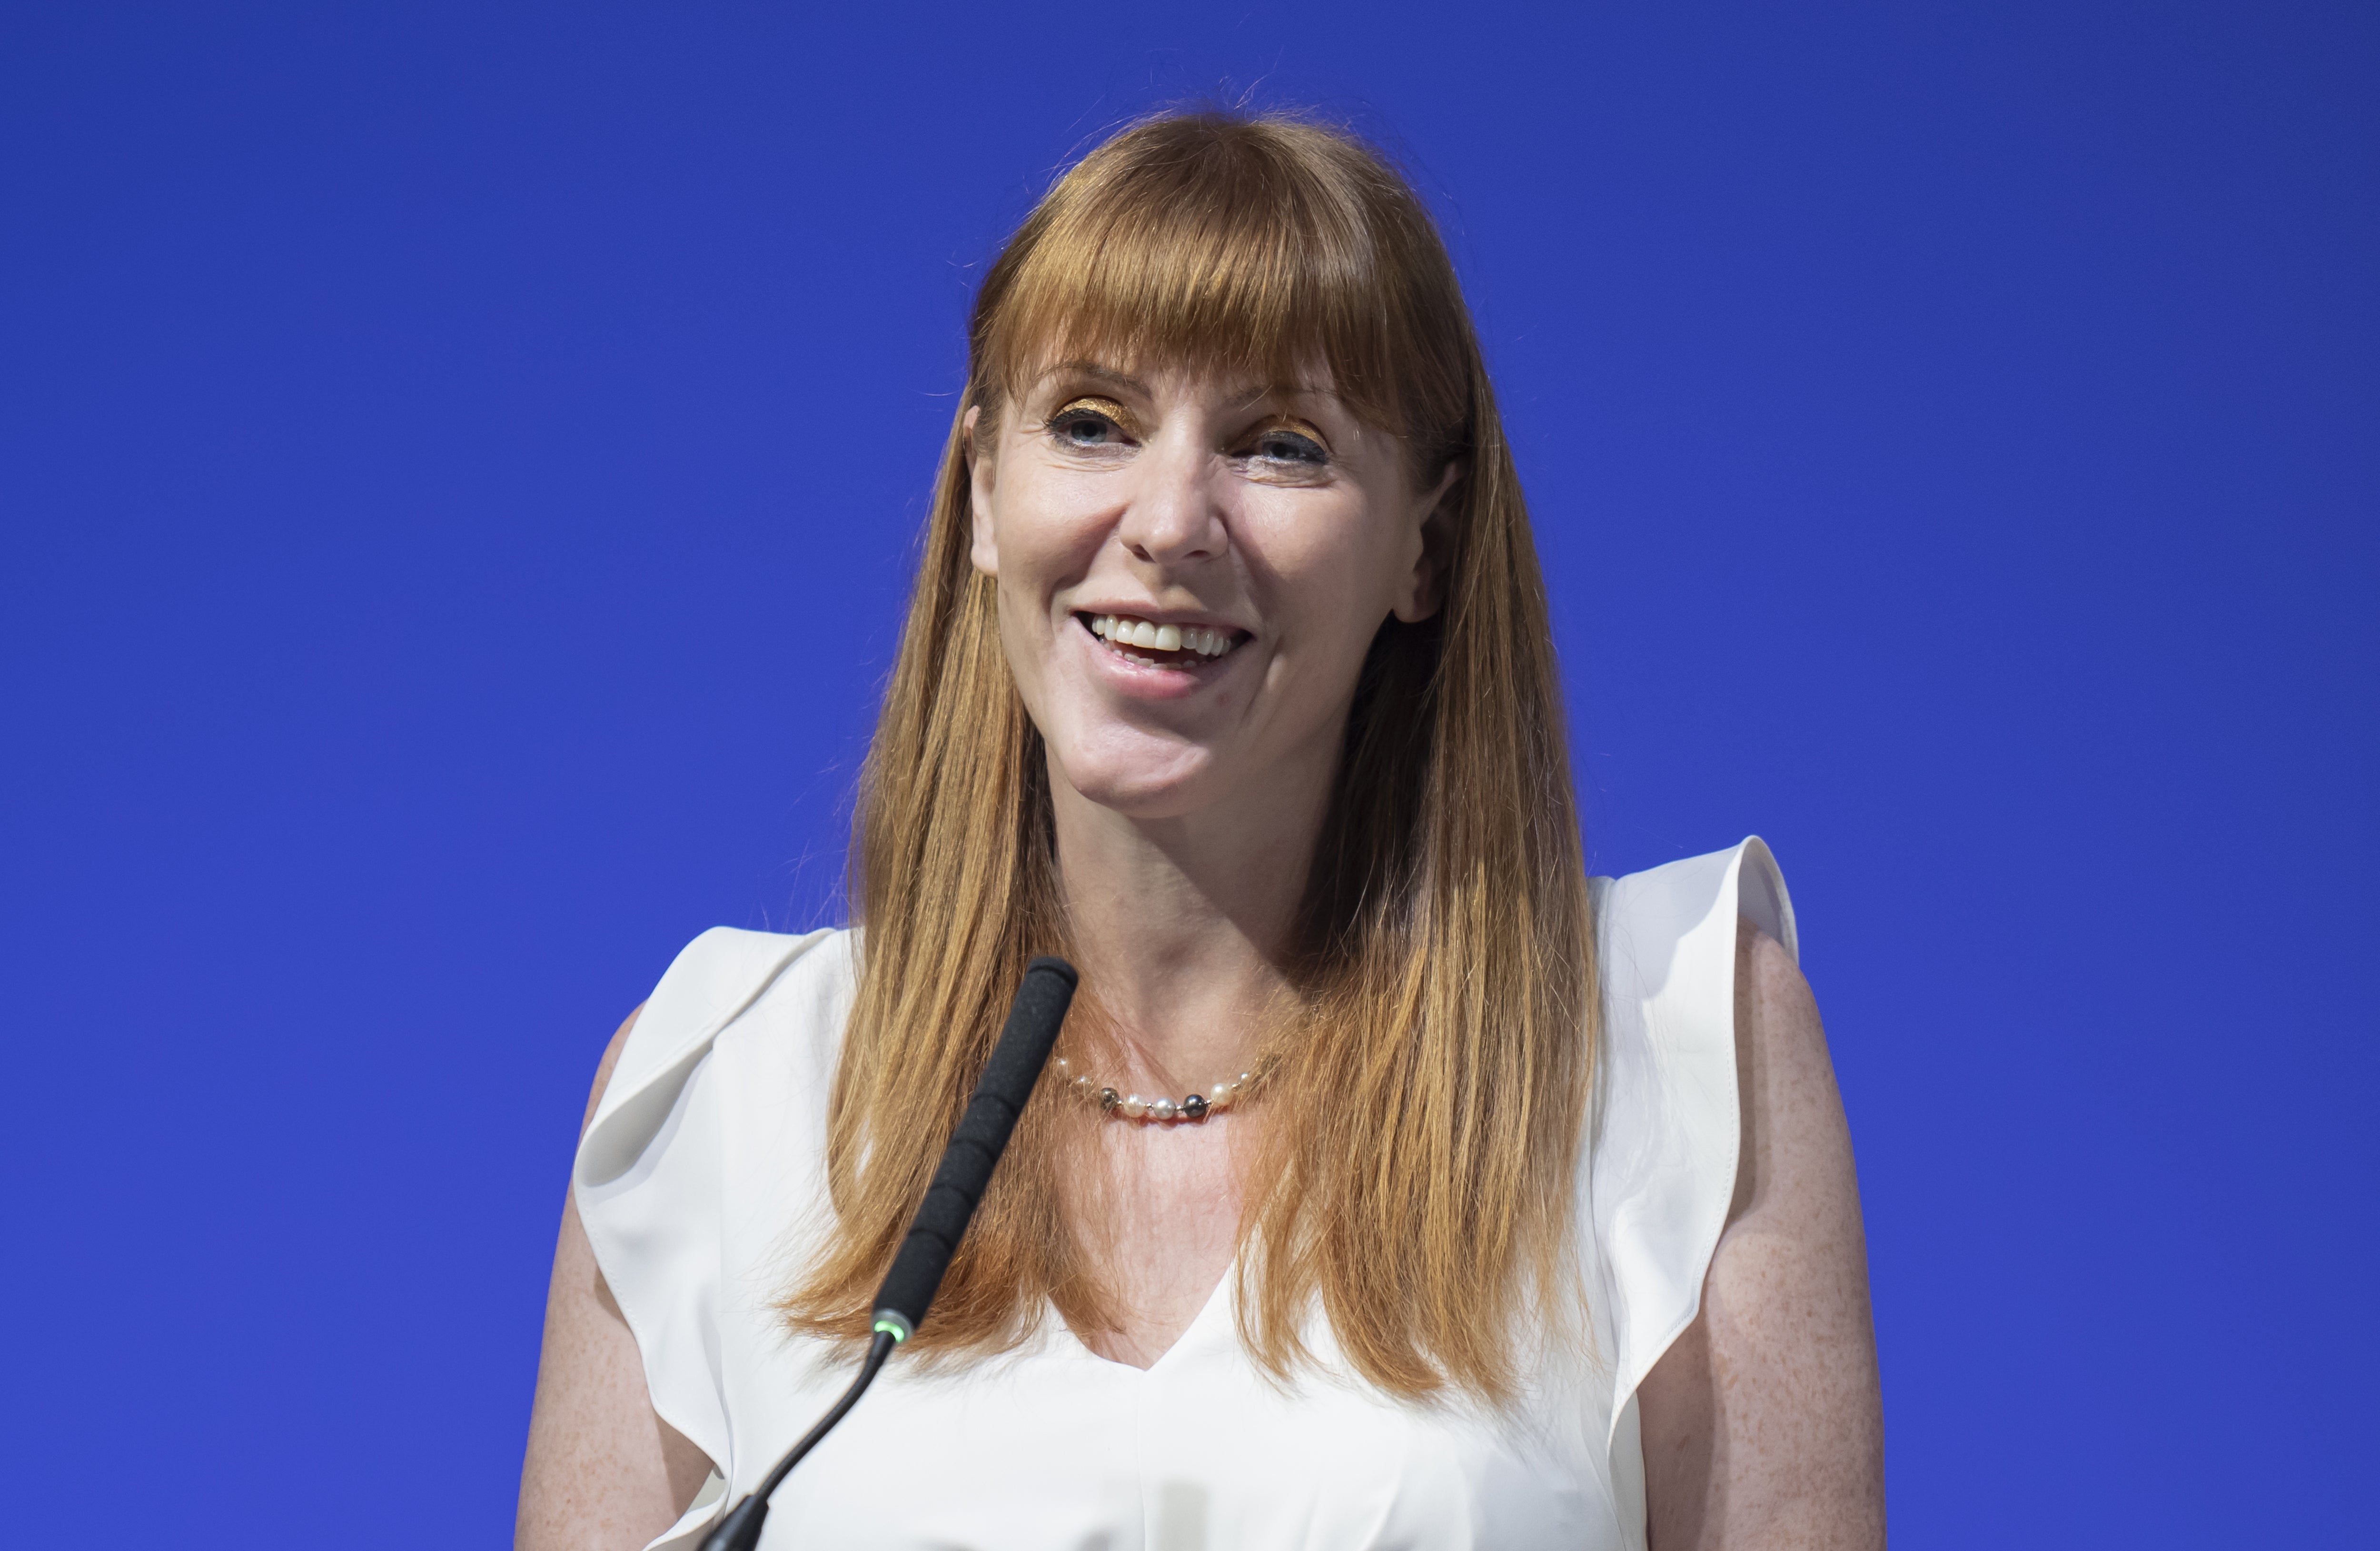 With the Tories’ intrusive forays into her private tax concerns, Angela Rayner has been the victim of class prejudice